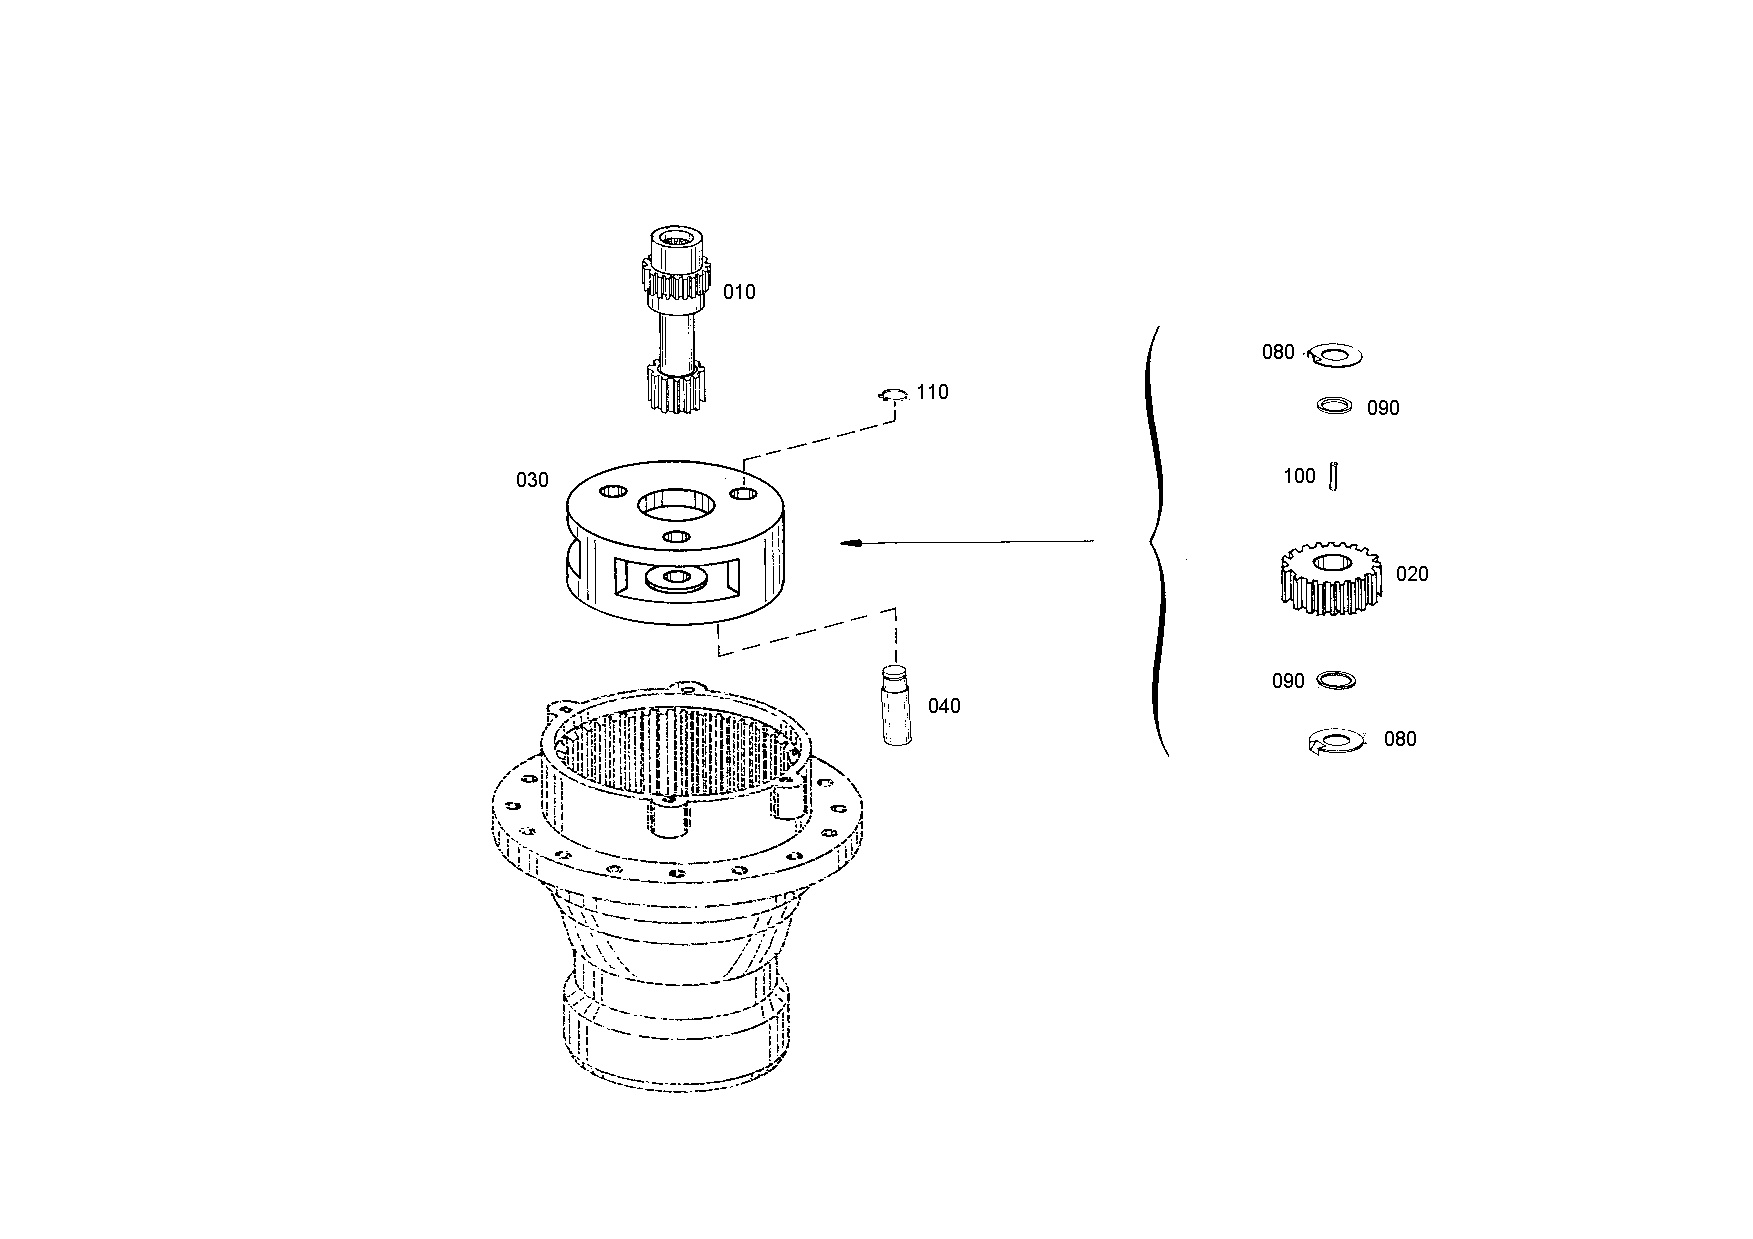 drawing for FUCHS-BAGGER GMBH + CO.KG 5904658736 - PLANET SHAFT (figure 2)